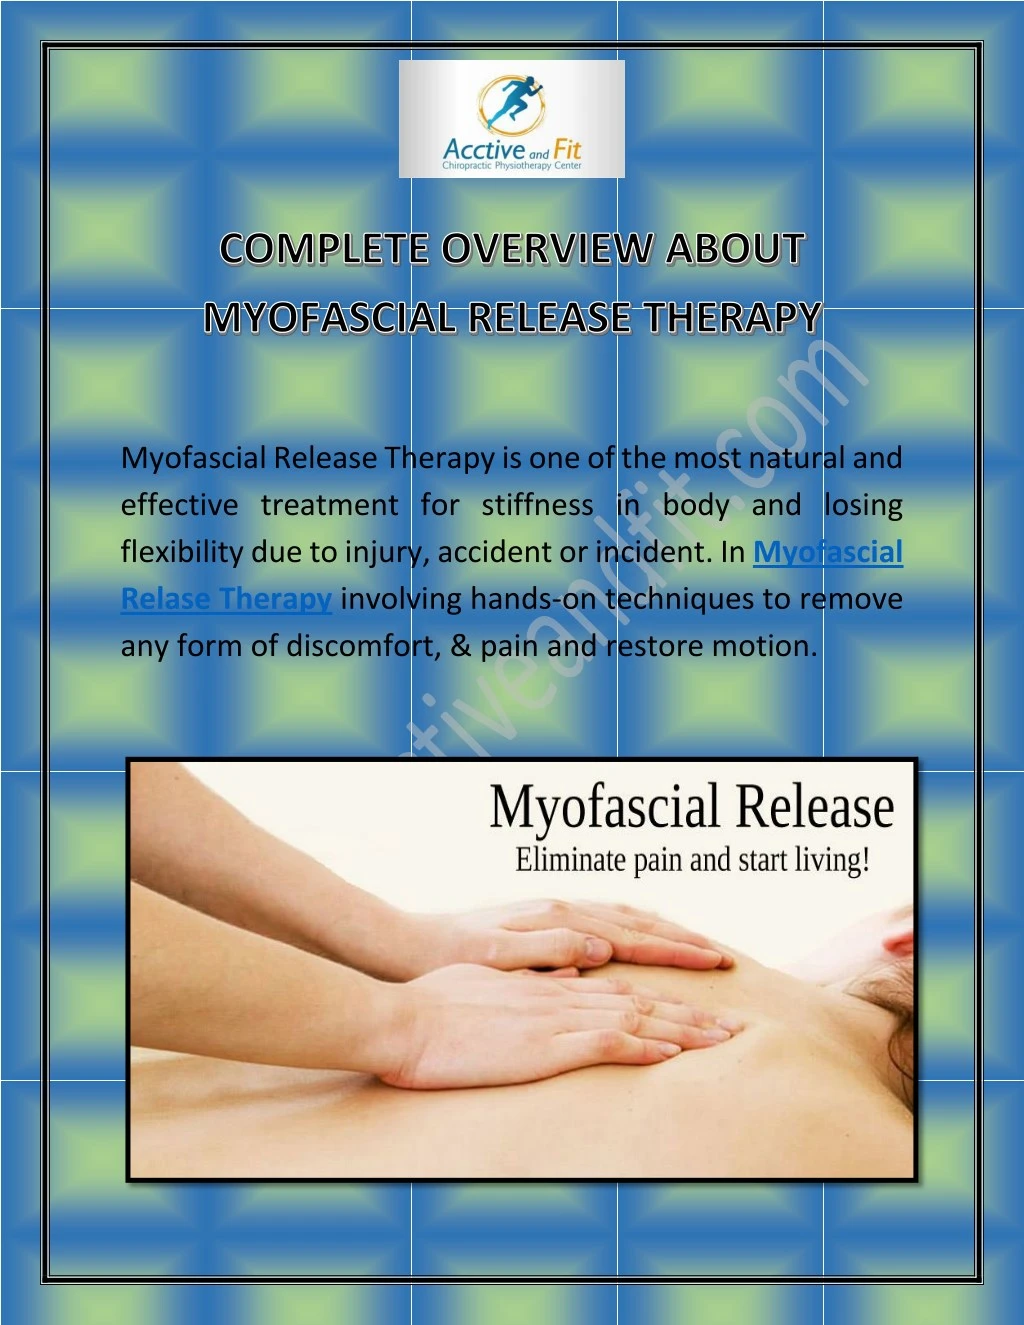 myofascial release therapy is one of the most